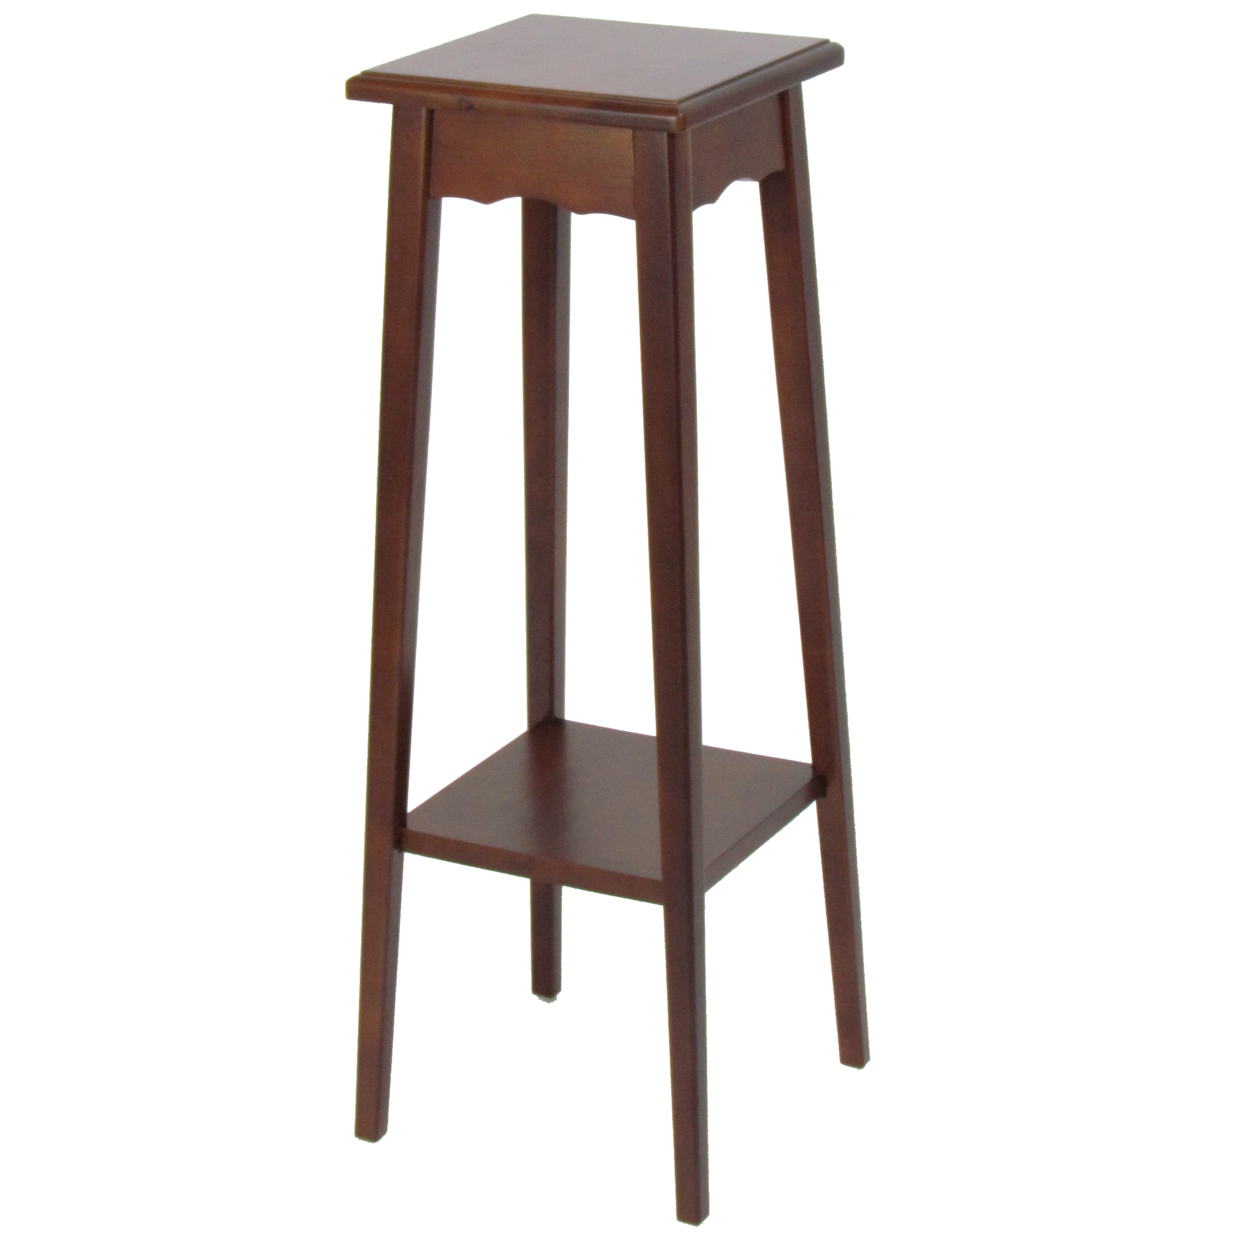 39.5 Inch Plant Stand With Tapered Slanted Legs And Bottom Shelf, Brown- Saltoro Sherpi